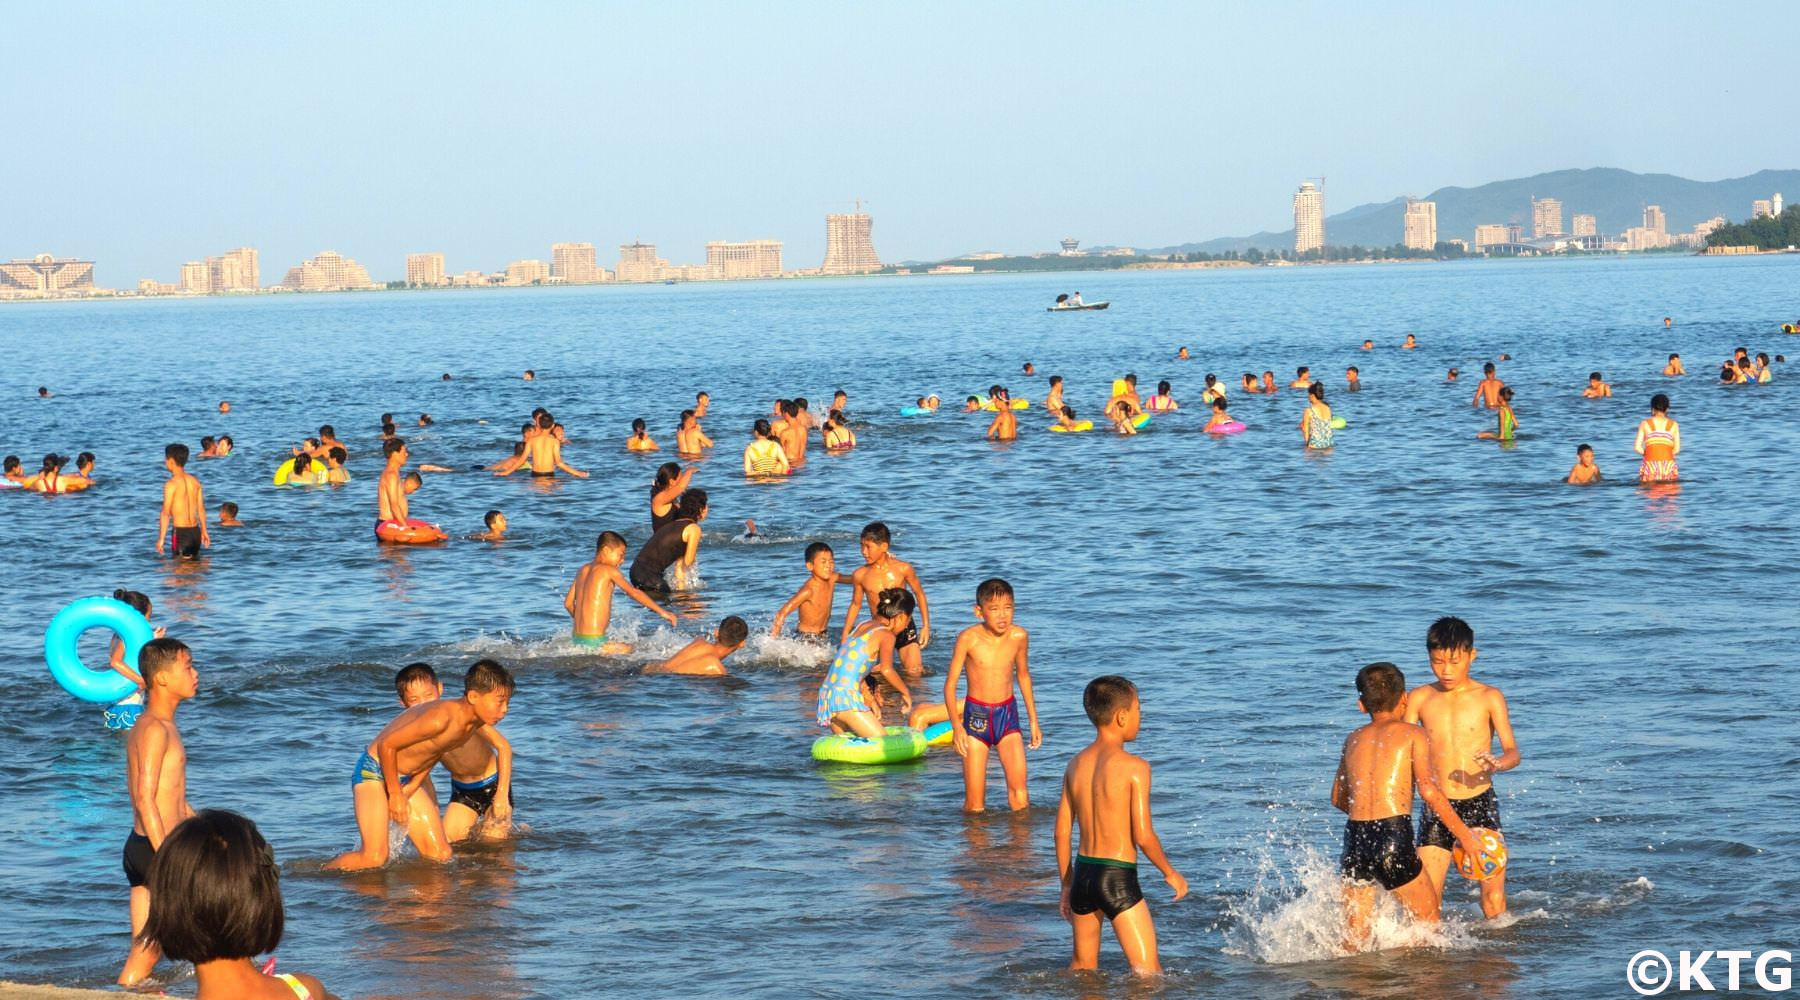 Children having fun at the beach in Wonsan, North Korea. You can see the Wonsan-Kalma project in the background. Trip arranged by KTG Tours